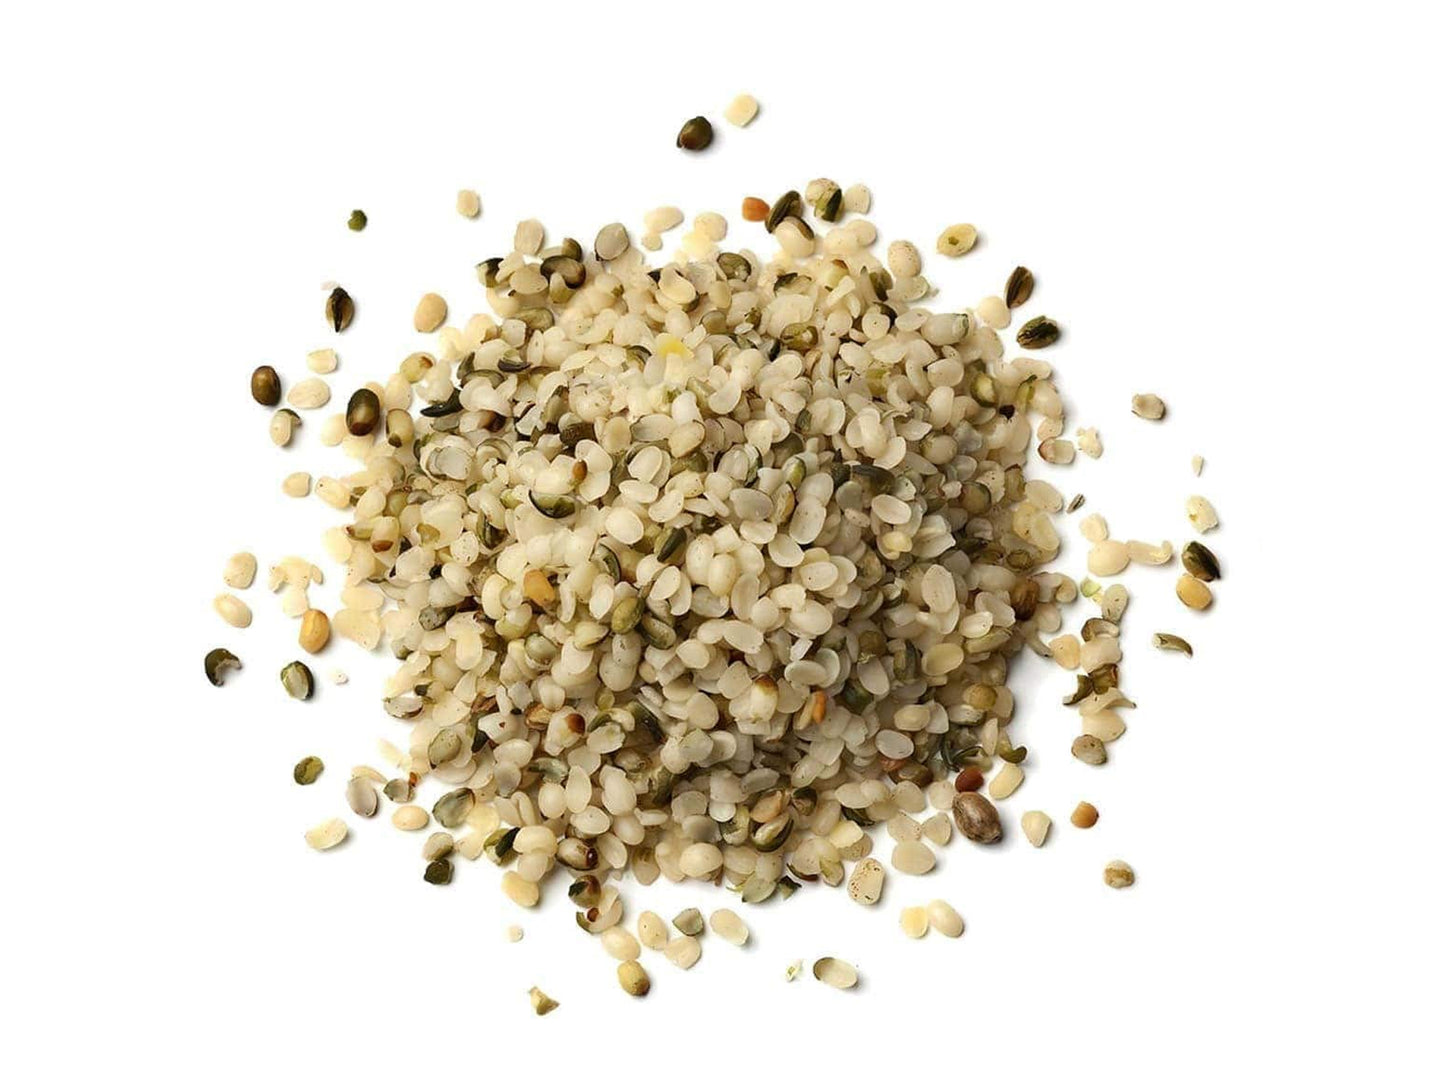 Canadian Hemp Seeds — Non-GMO Verified, Raw Hearts, Hulled, Shelled, Kosher, Vegan, Keto and Paleo Friendly, Rich in Protein, Omegas 3 & 6 - by Food to Live